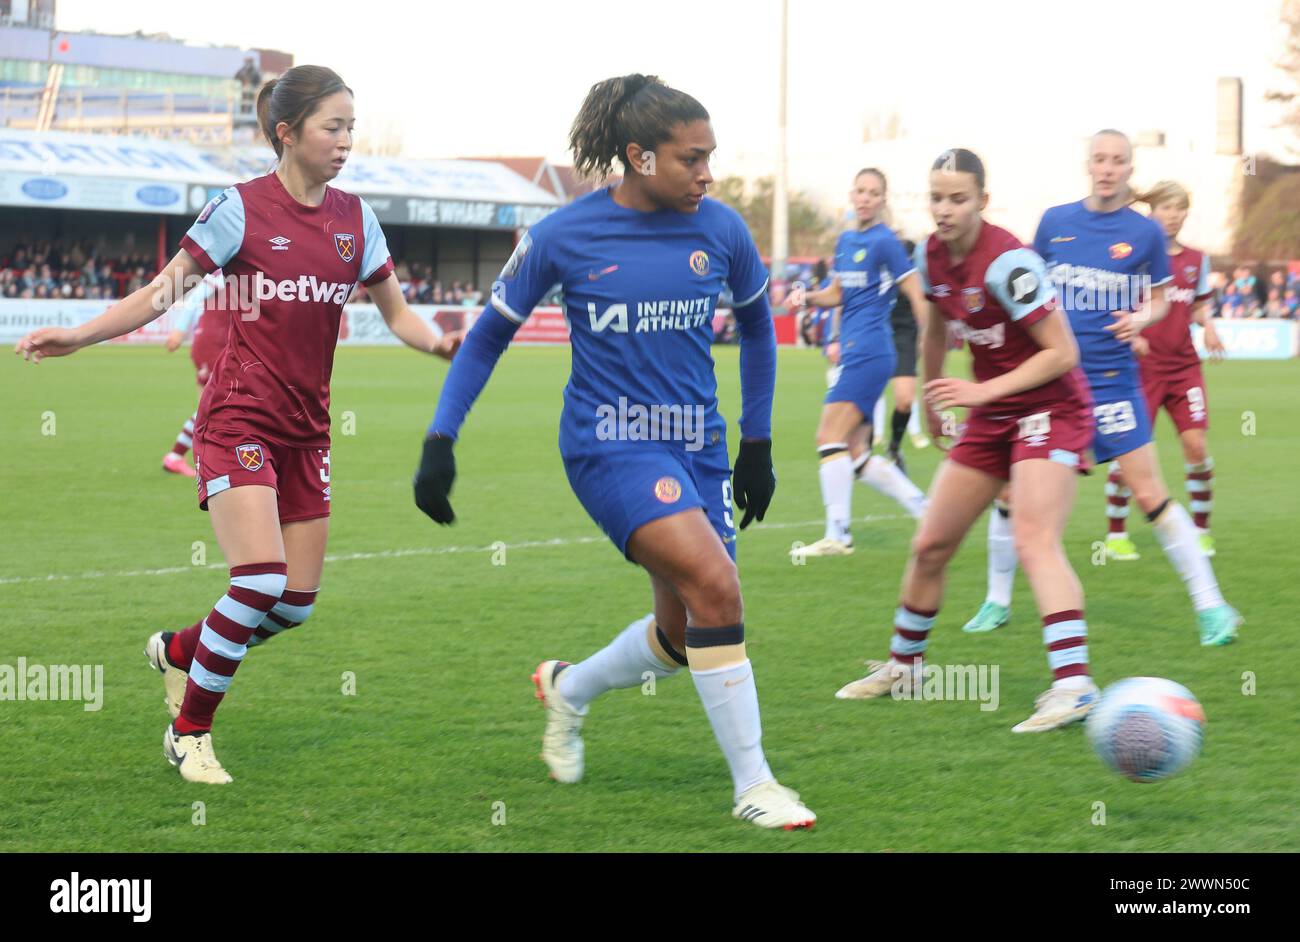 DAGENHAM, ENGLAND - MARCH 24:L-R Risa Shimizu of West Ham United WFC and Chelsea Women Caiarina Macario in action  during Barclays FA Women's Super Le Stock Photo